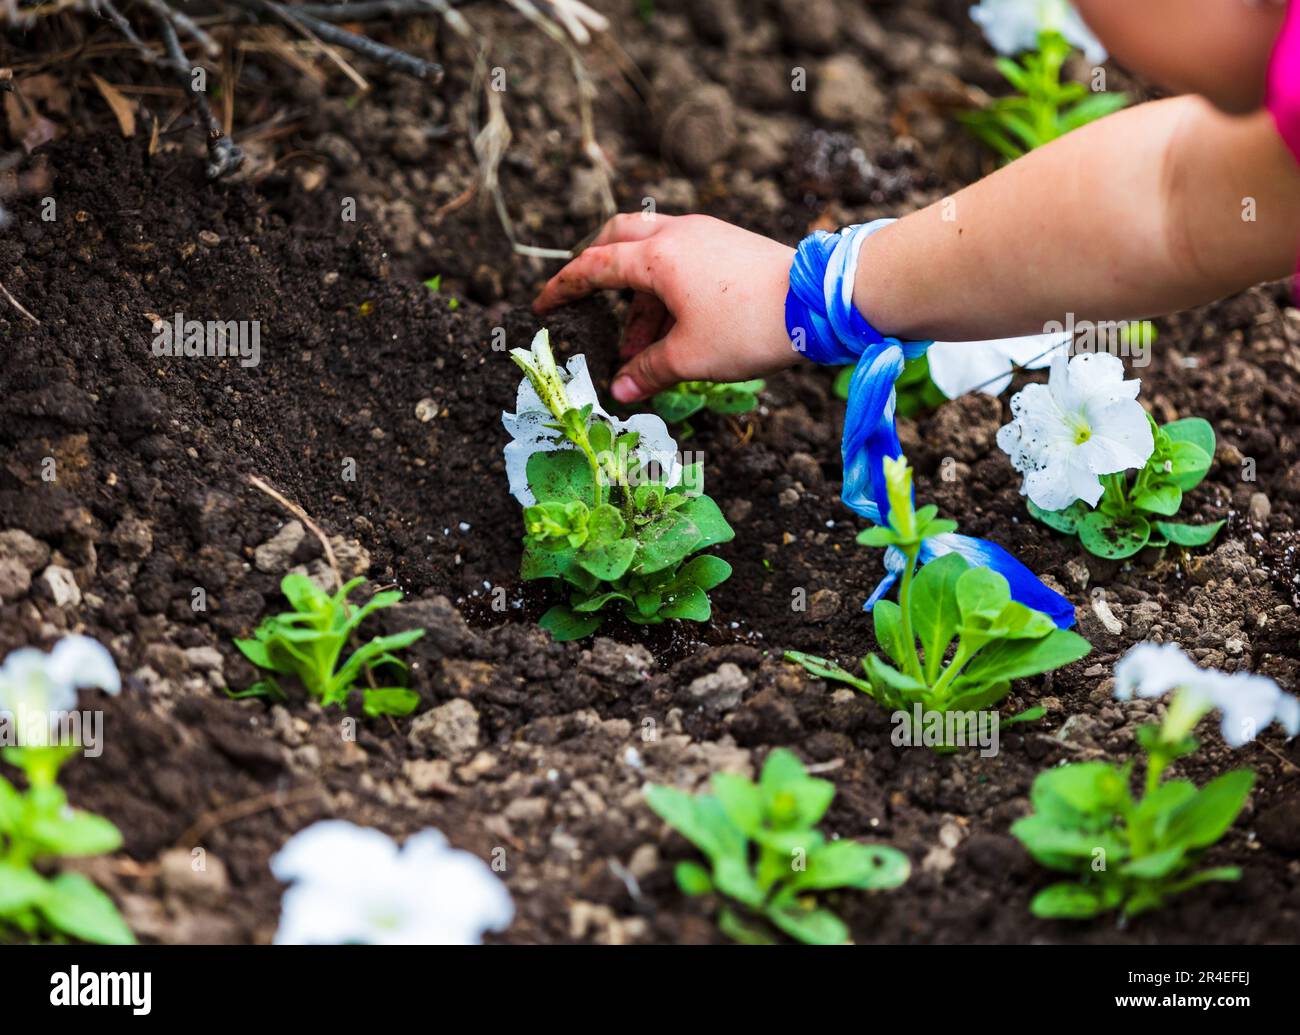 Hands planting new spring flowers in flowerbed. Stock Photo